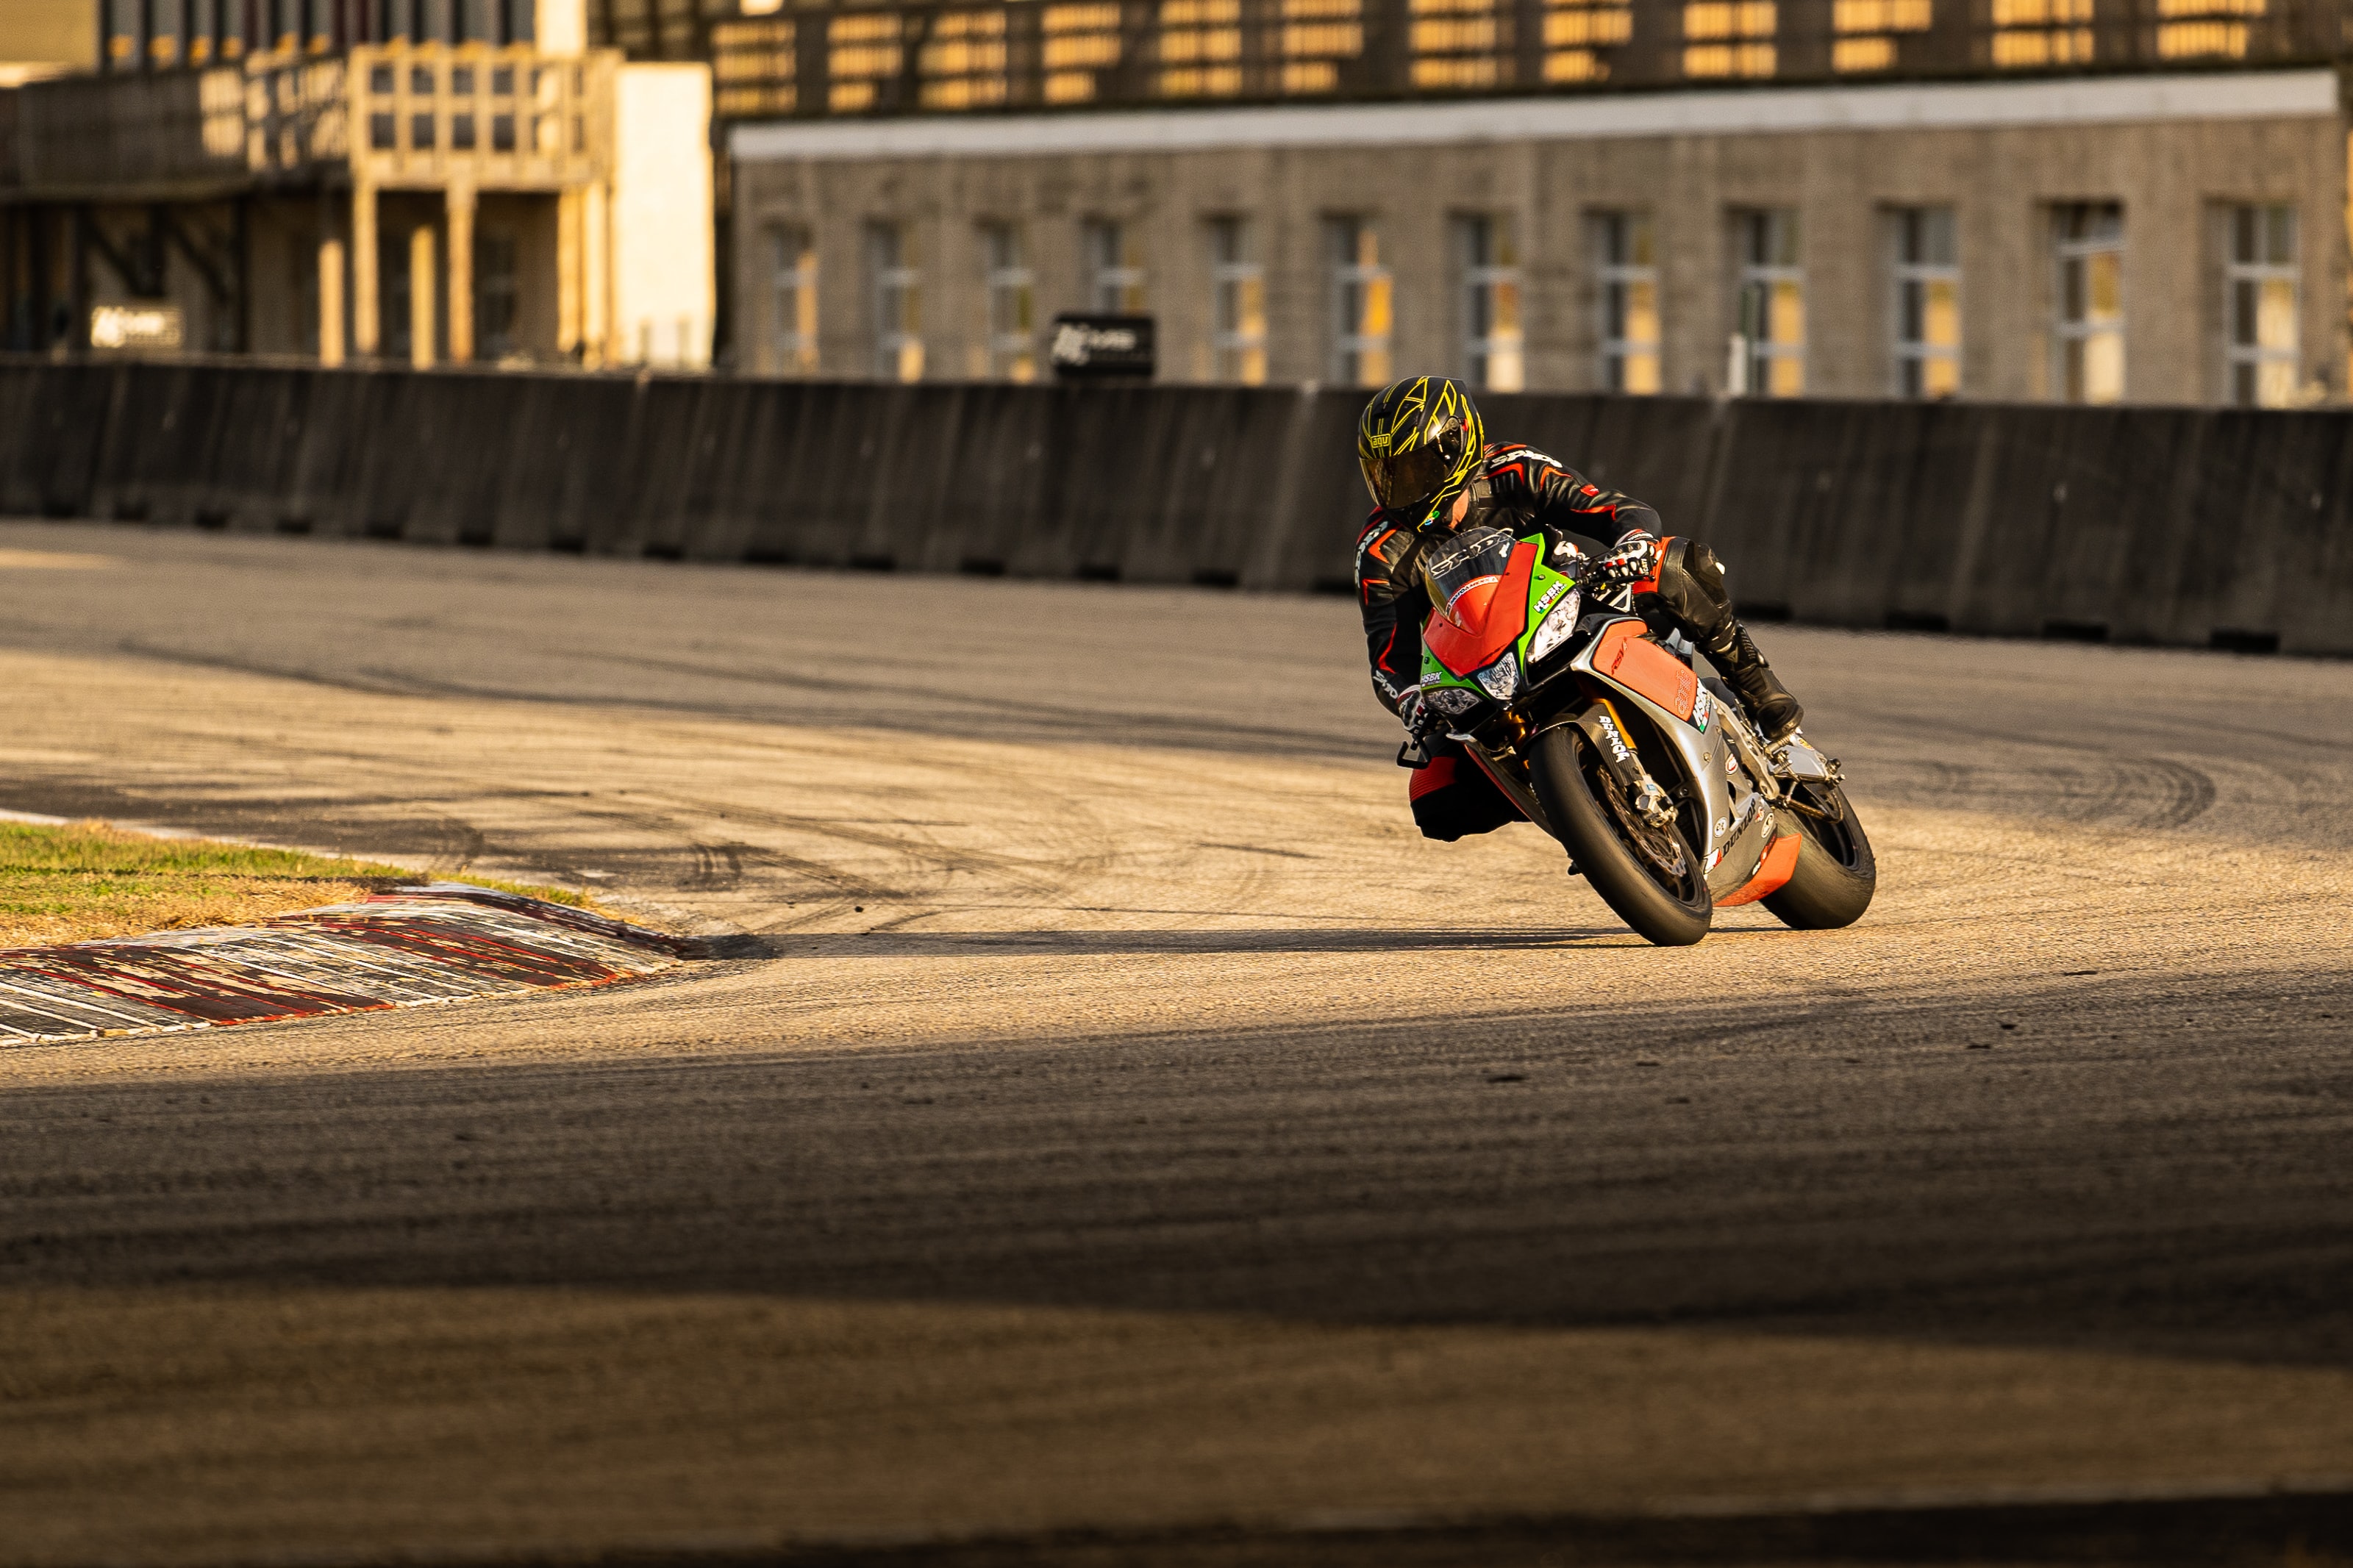 races, motorcycles, motorcyclist, motorcycle, bike, track, route